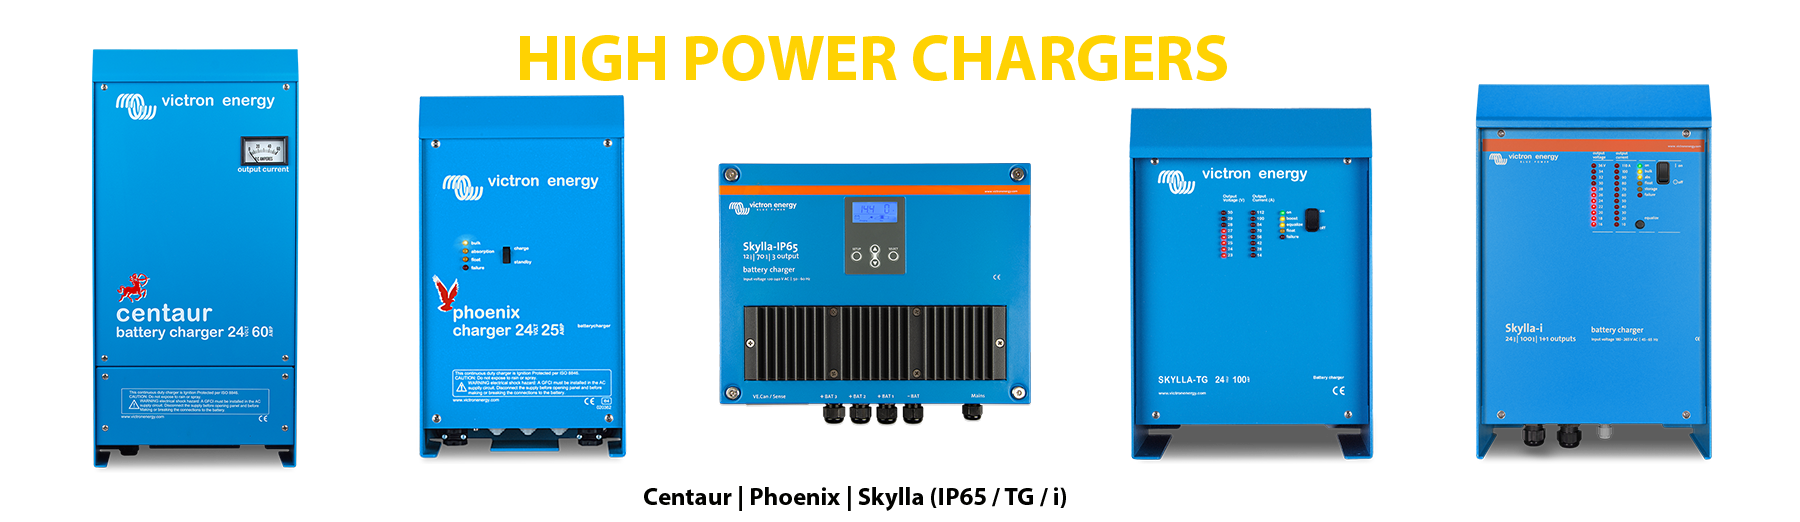 High power chargers